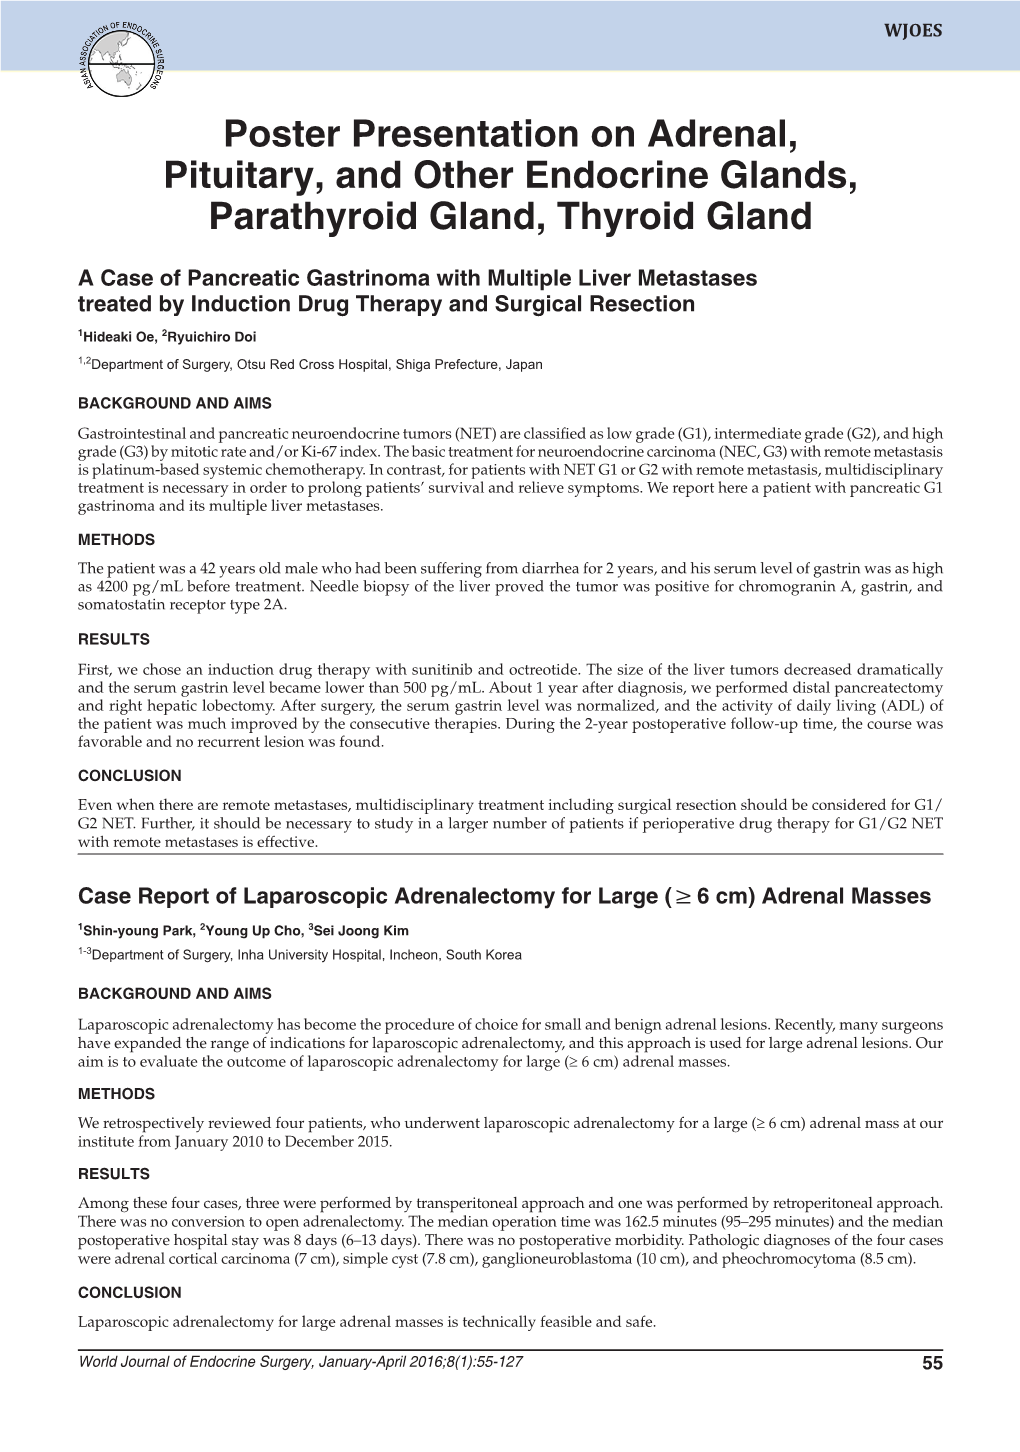 Poster Presentation on Adrenal, Pituitary, and Other Endocrine Glands, Parathyroid Gland, Thyroid Gland